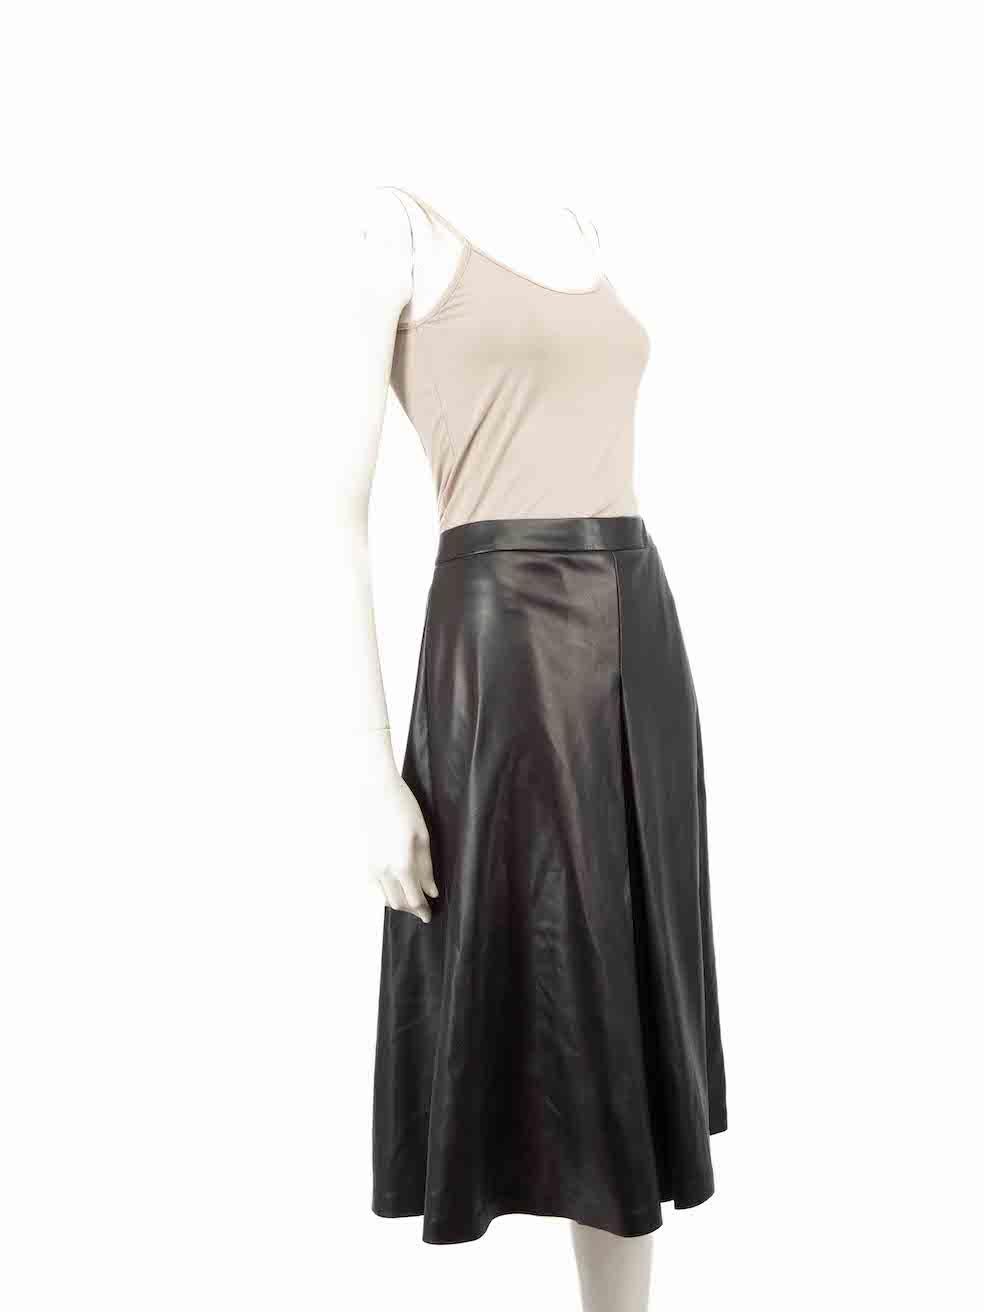 CONDITION is Very good. Hardly any visible wear to shorts is evident on this used Maison Margiela designer resale item.
 
 
 
 Details
 
 
 Black
 
 Faux leather
 
 Long shorts
 
 Pleated
 
 Side zip and snap button fastening
 
 
 
 
 
 Made in